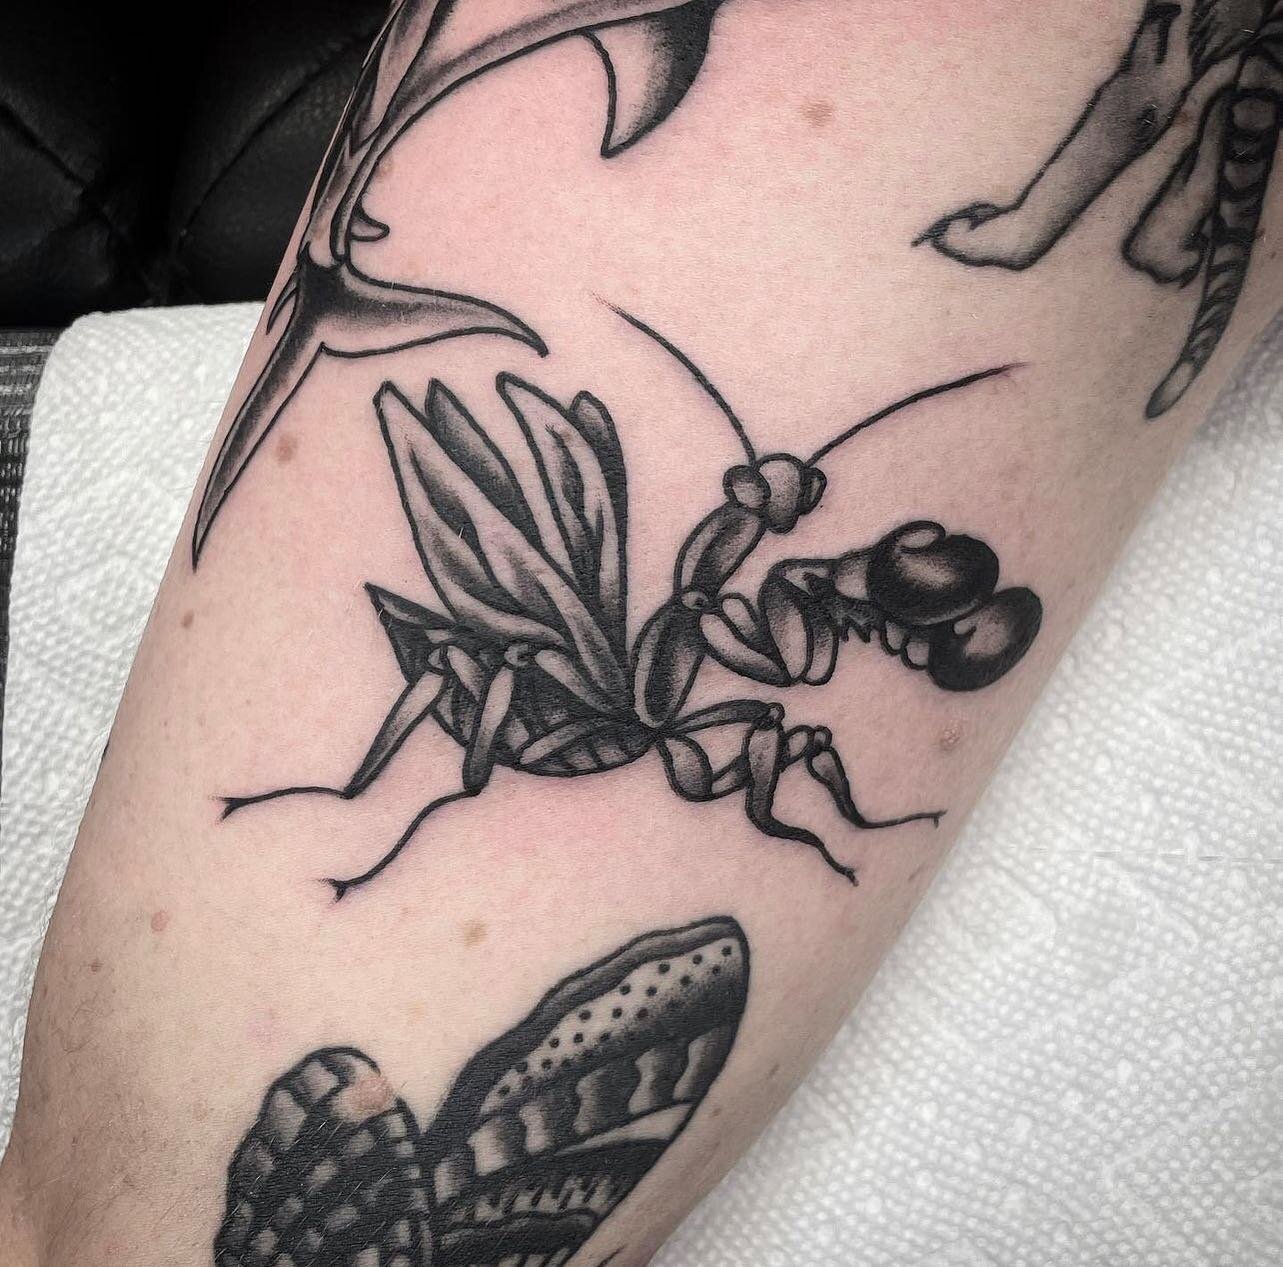 That&rsquo;s one tough praying mantis 🥊
Done by @nickpanzer